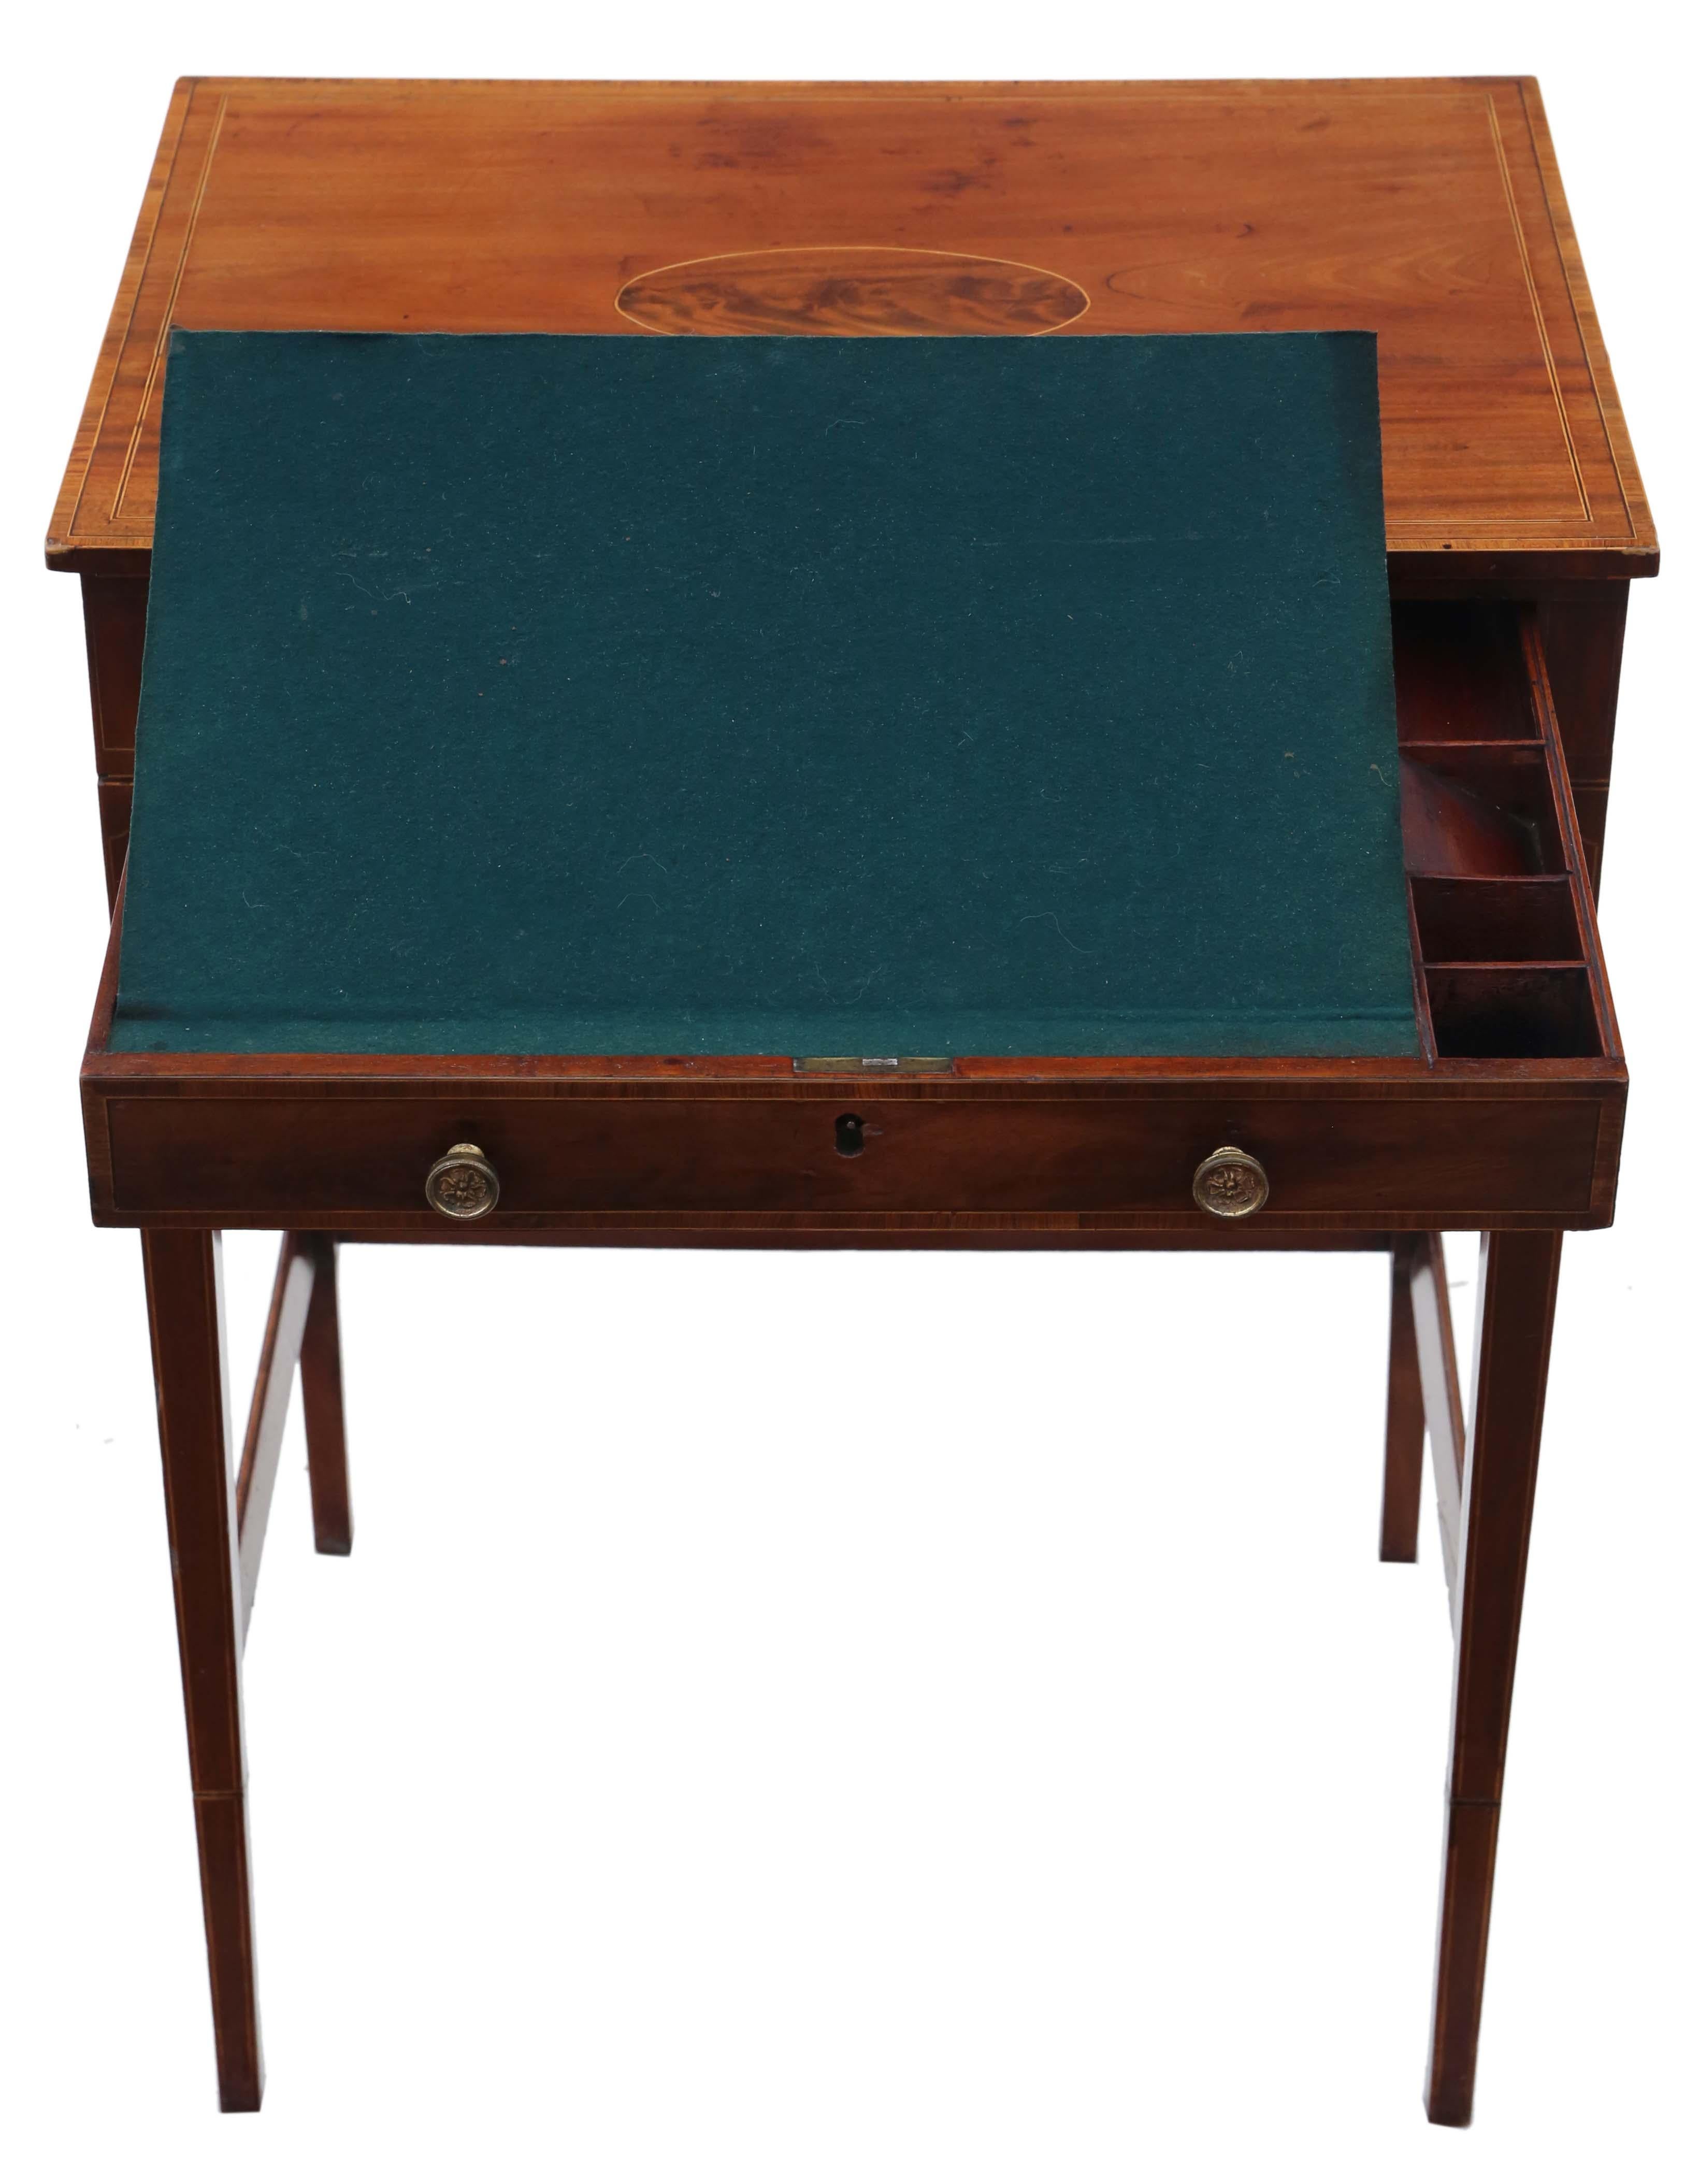 Wood Antique Fine Quality Early 19th Century Inlaid Mahogany Writing Side Table Desk For Sale